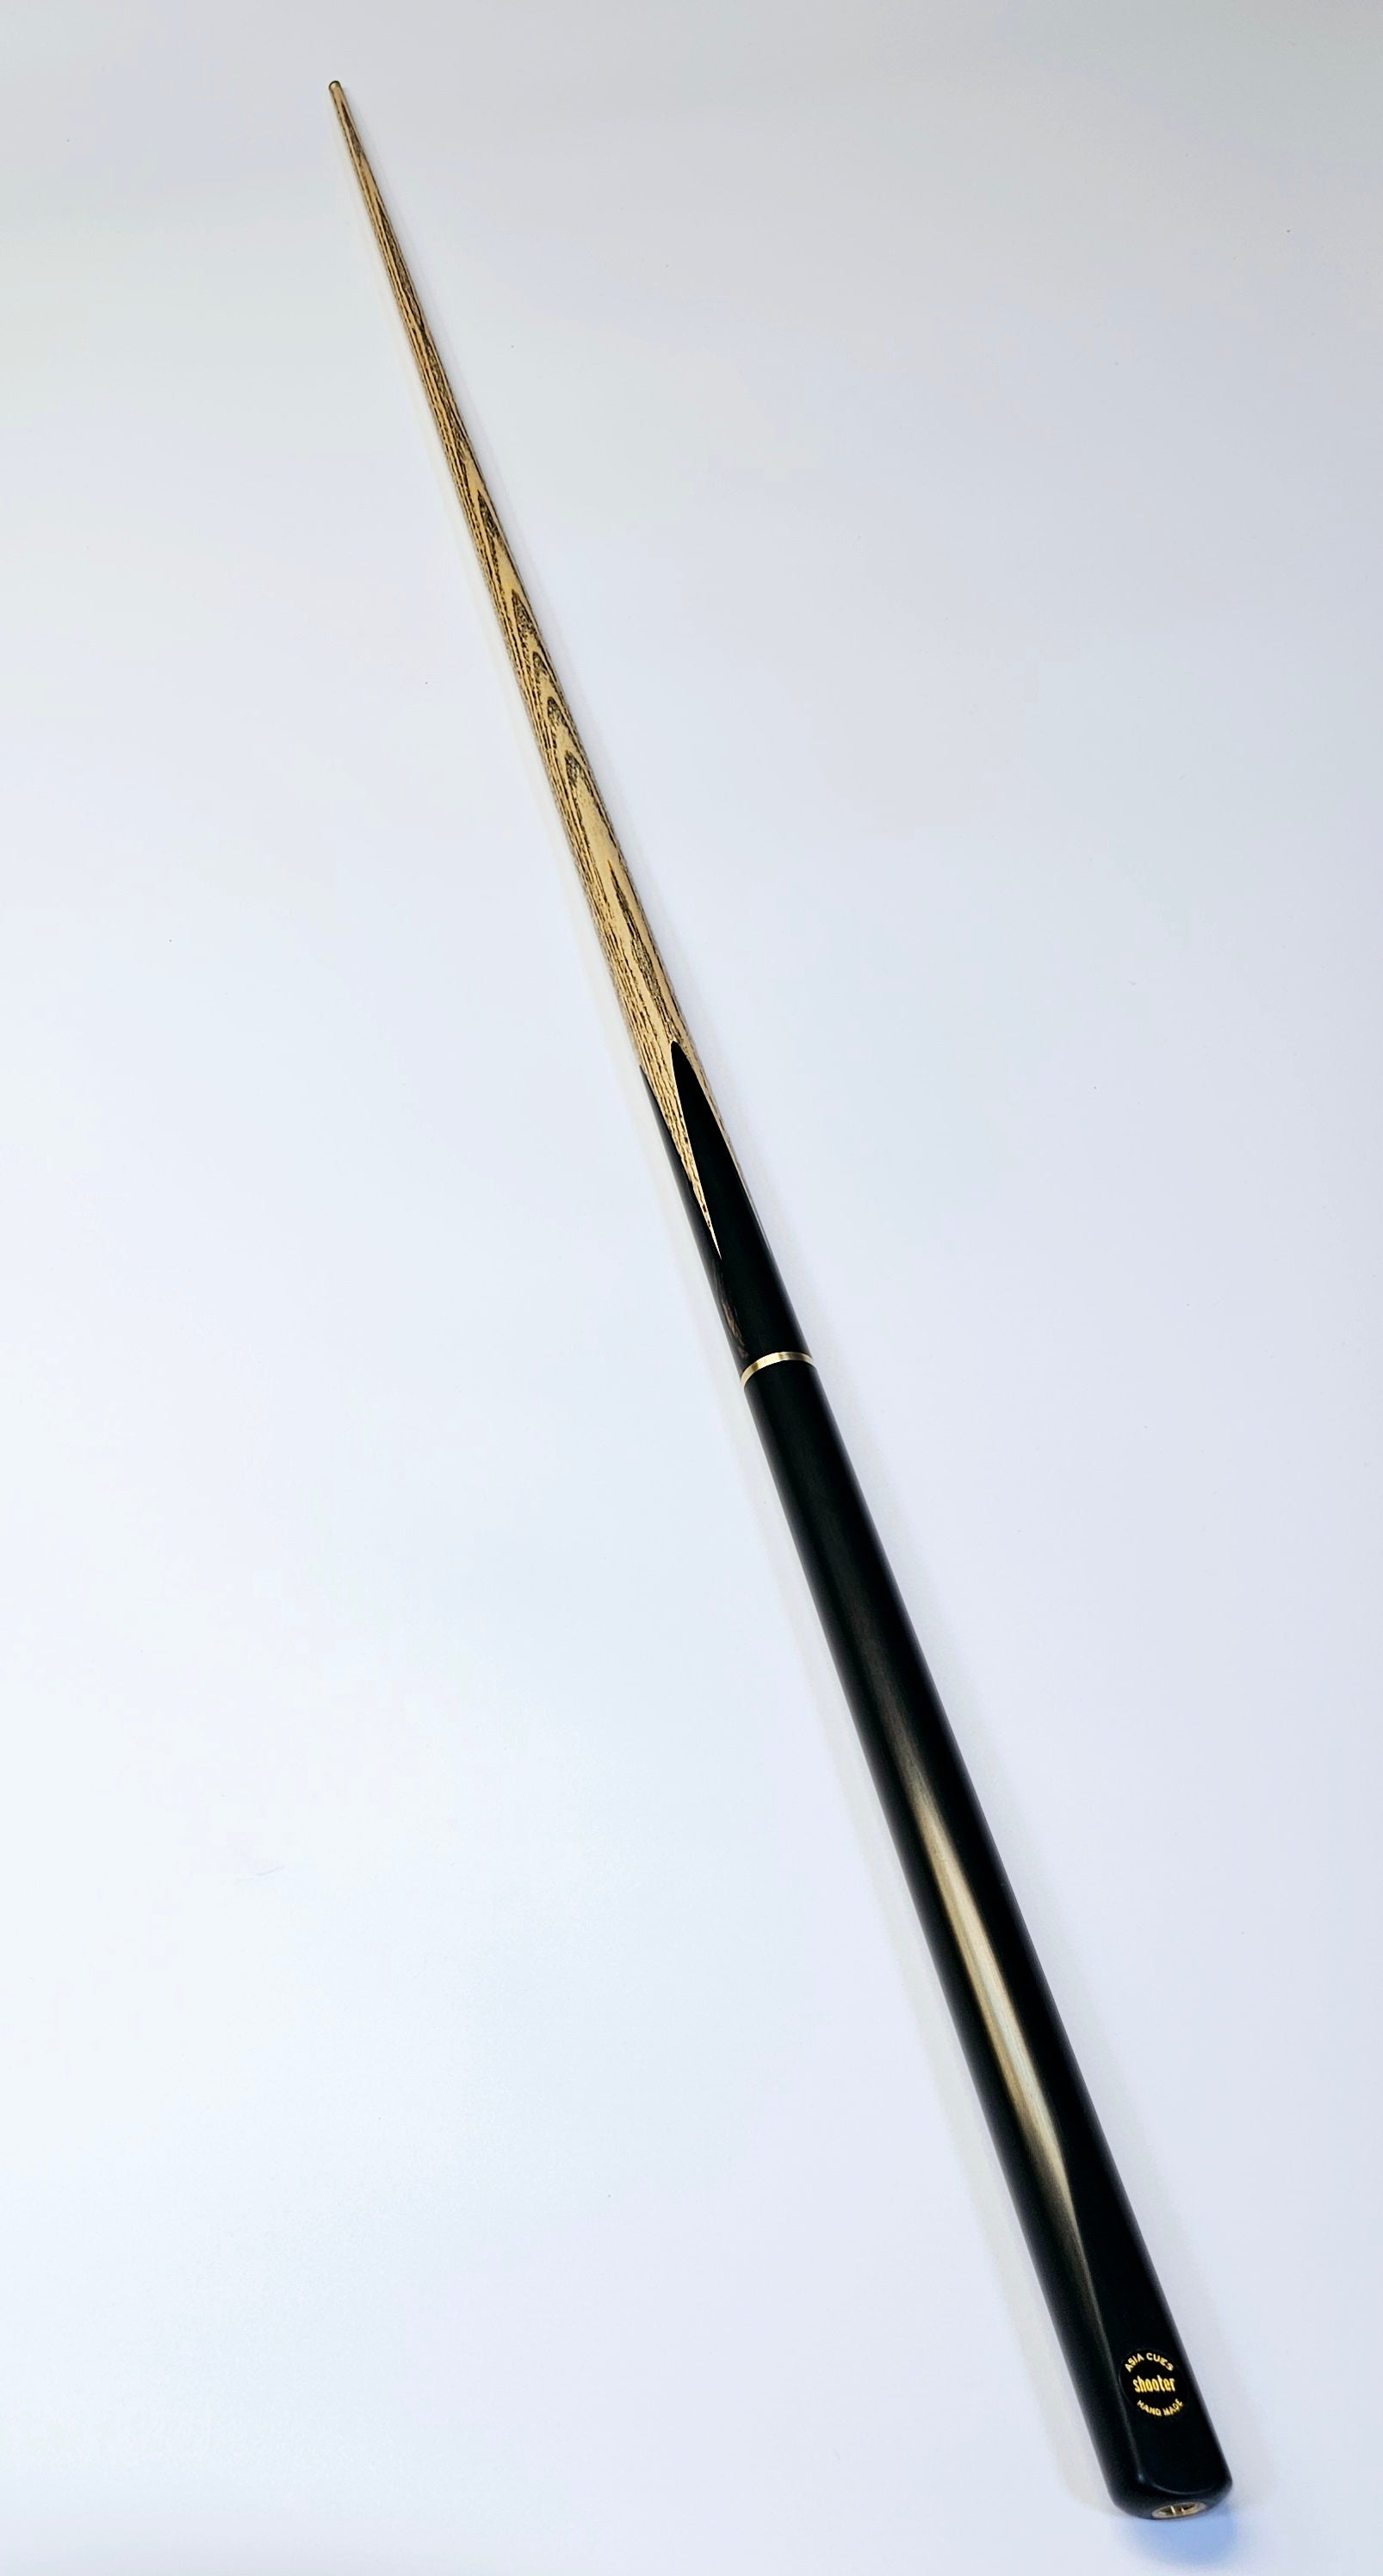 Asia Cues Shooter - 3/4 Jointed Pool Cue 8.7mm Tip, 17.2oz, 58"